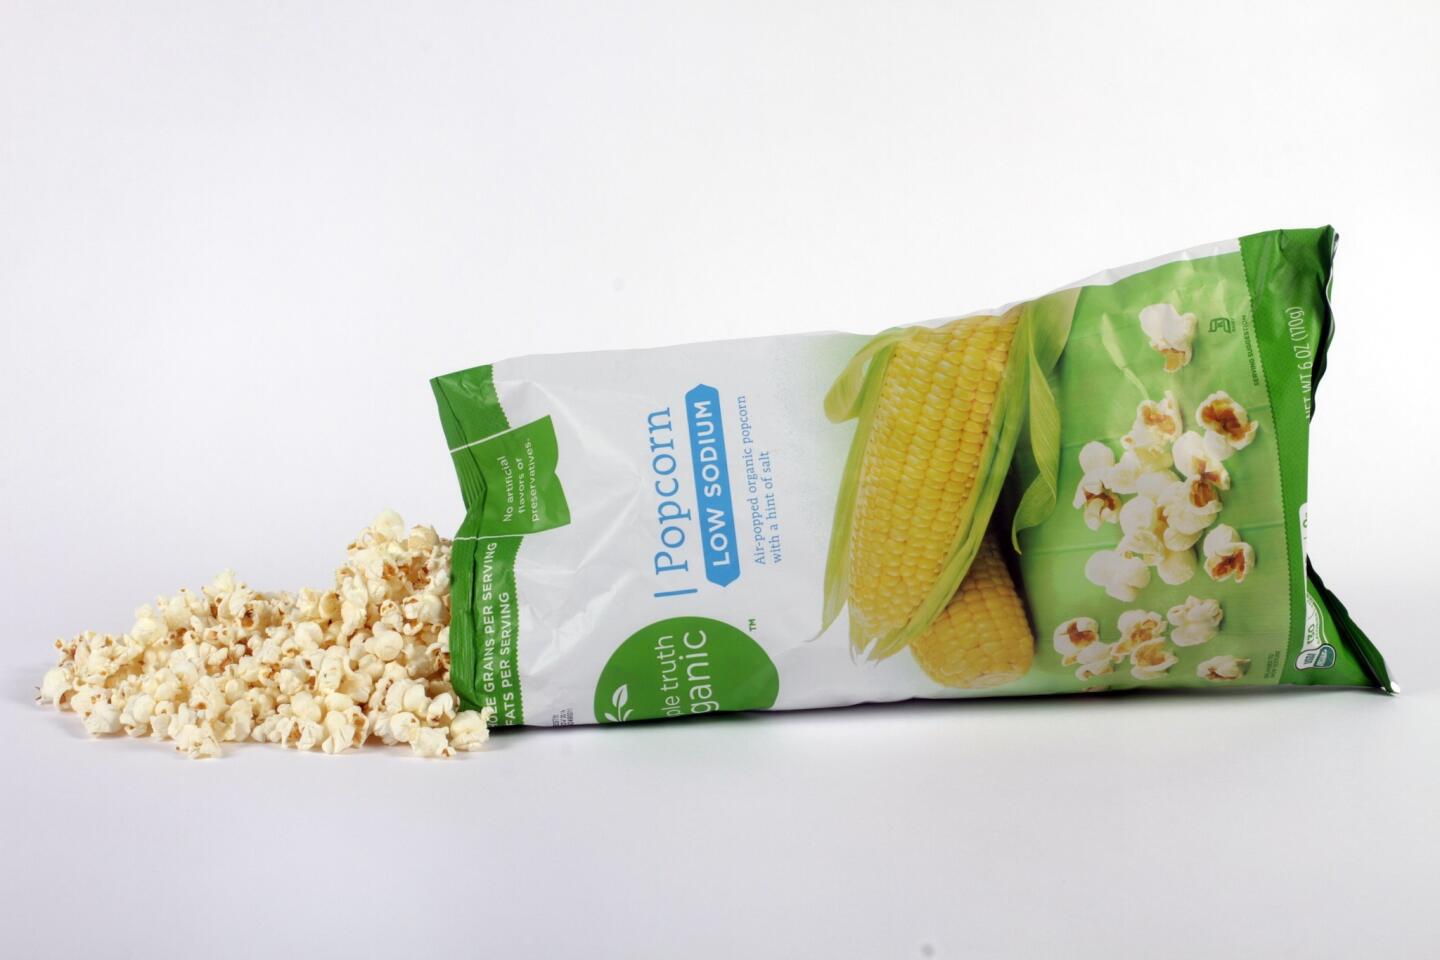 Organic, low-salt varieties of popcorn can be a good snack choice. Healthful flavorings can then be added for some dimension (and to please those with picky palates).